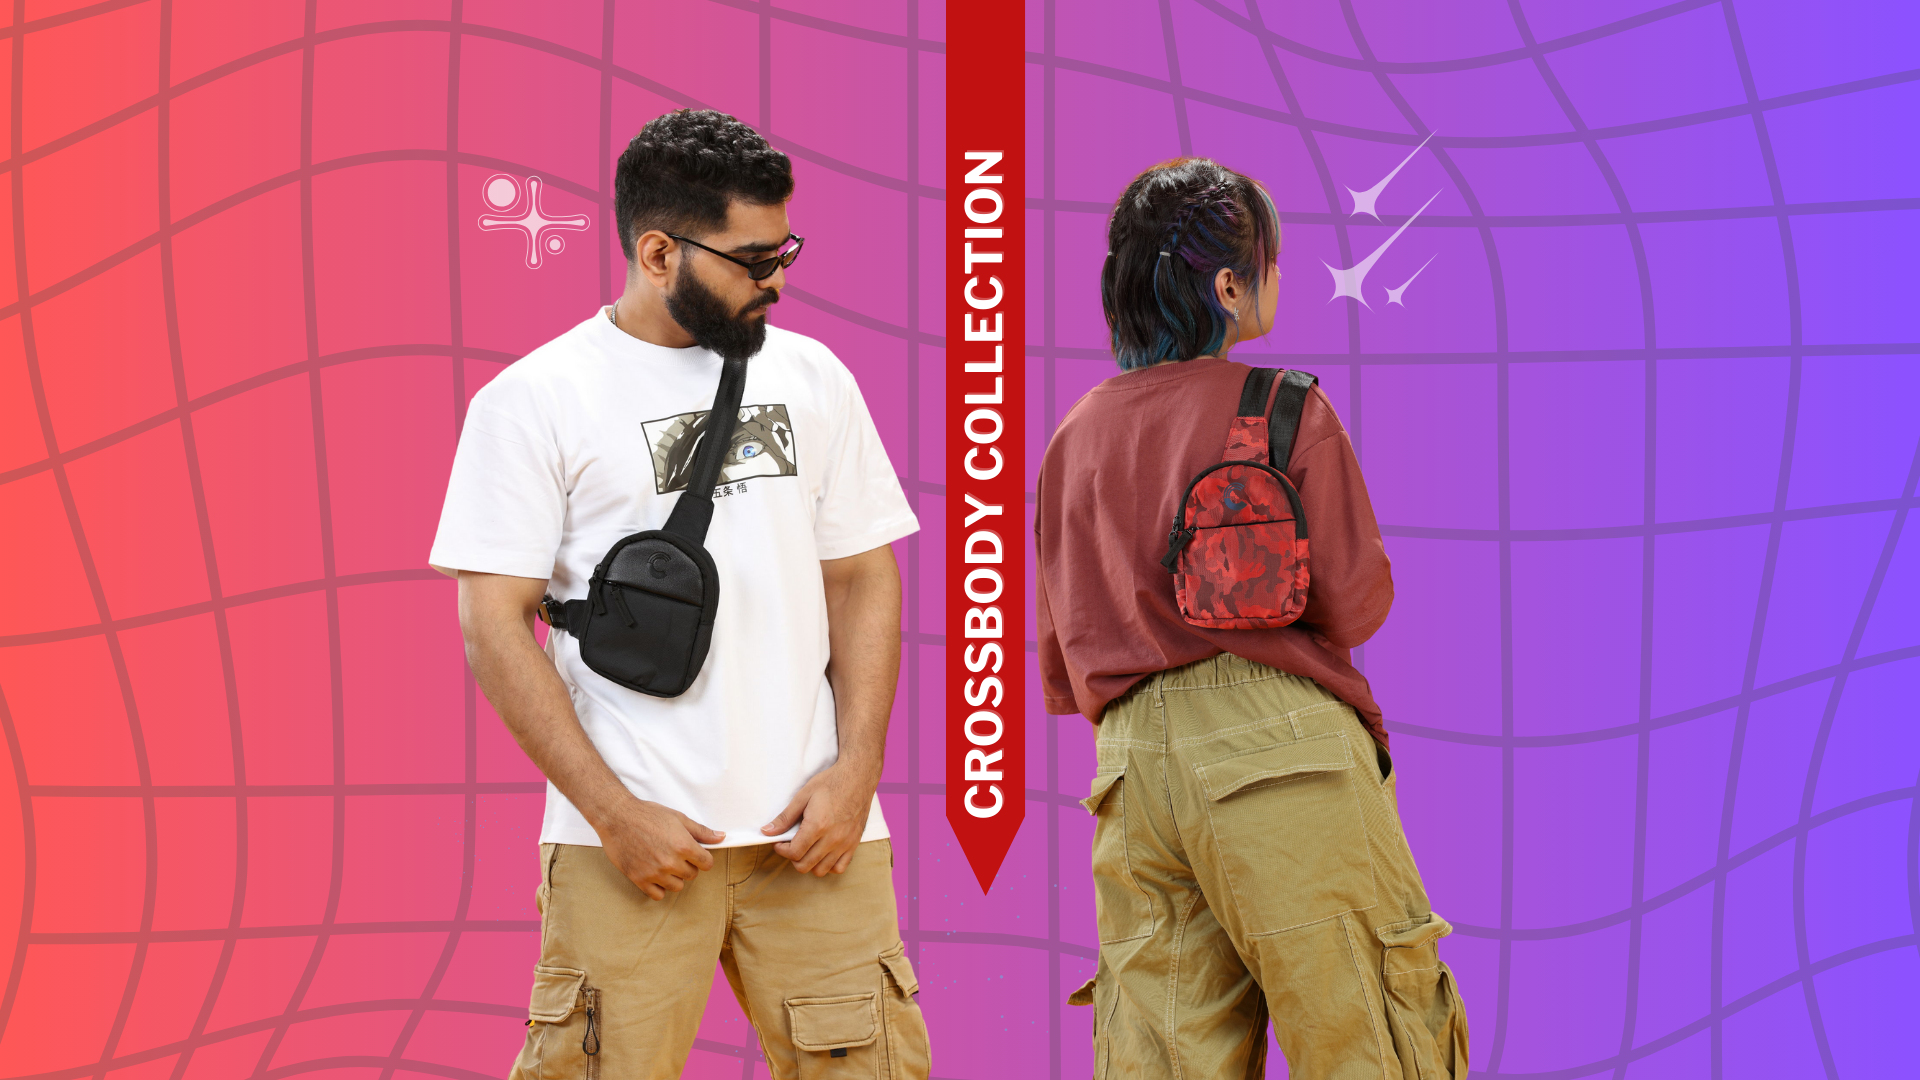 A boy and girl standing with bags hanging across their chests. The boy's bag is black and has many pockets, while the girl's bag is in red camouflage with a secure strap. They look cool and trendy, showing how stylish and useful crossbody bags can be.